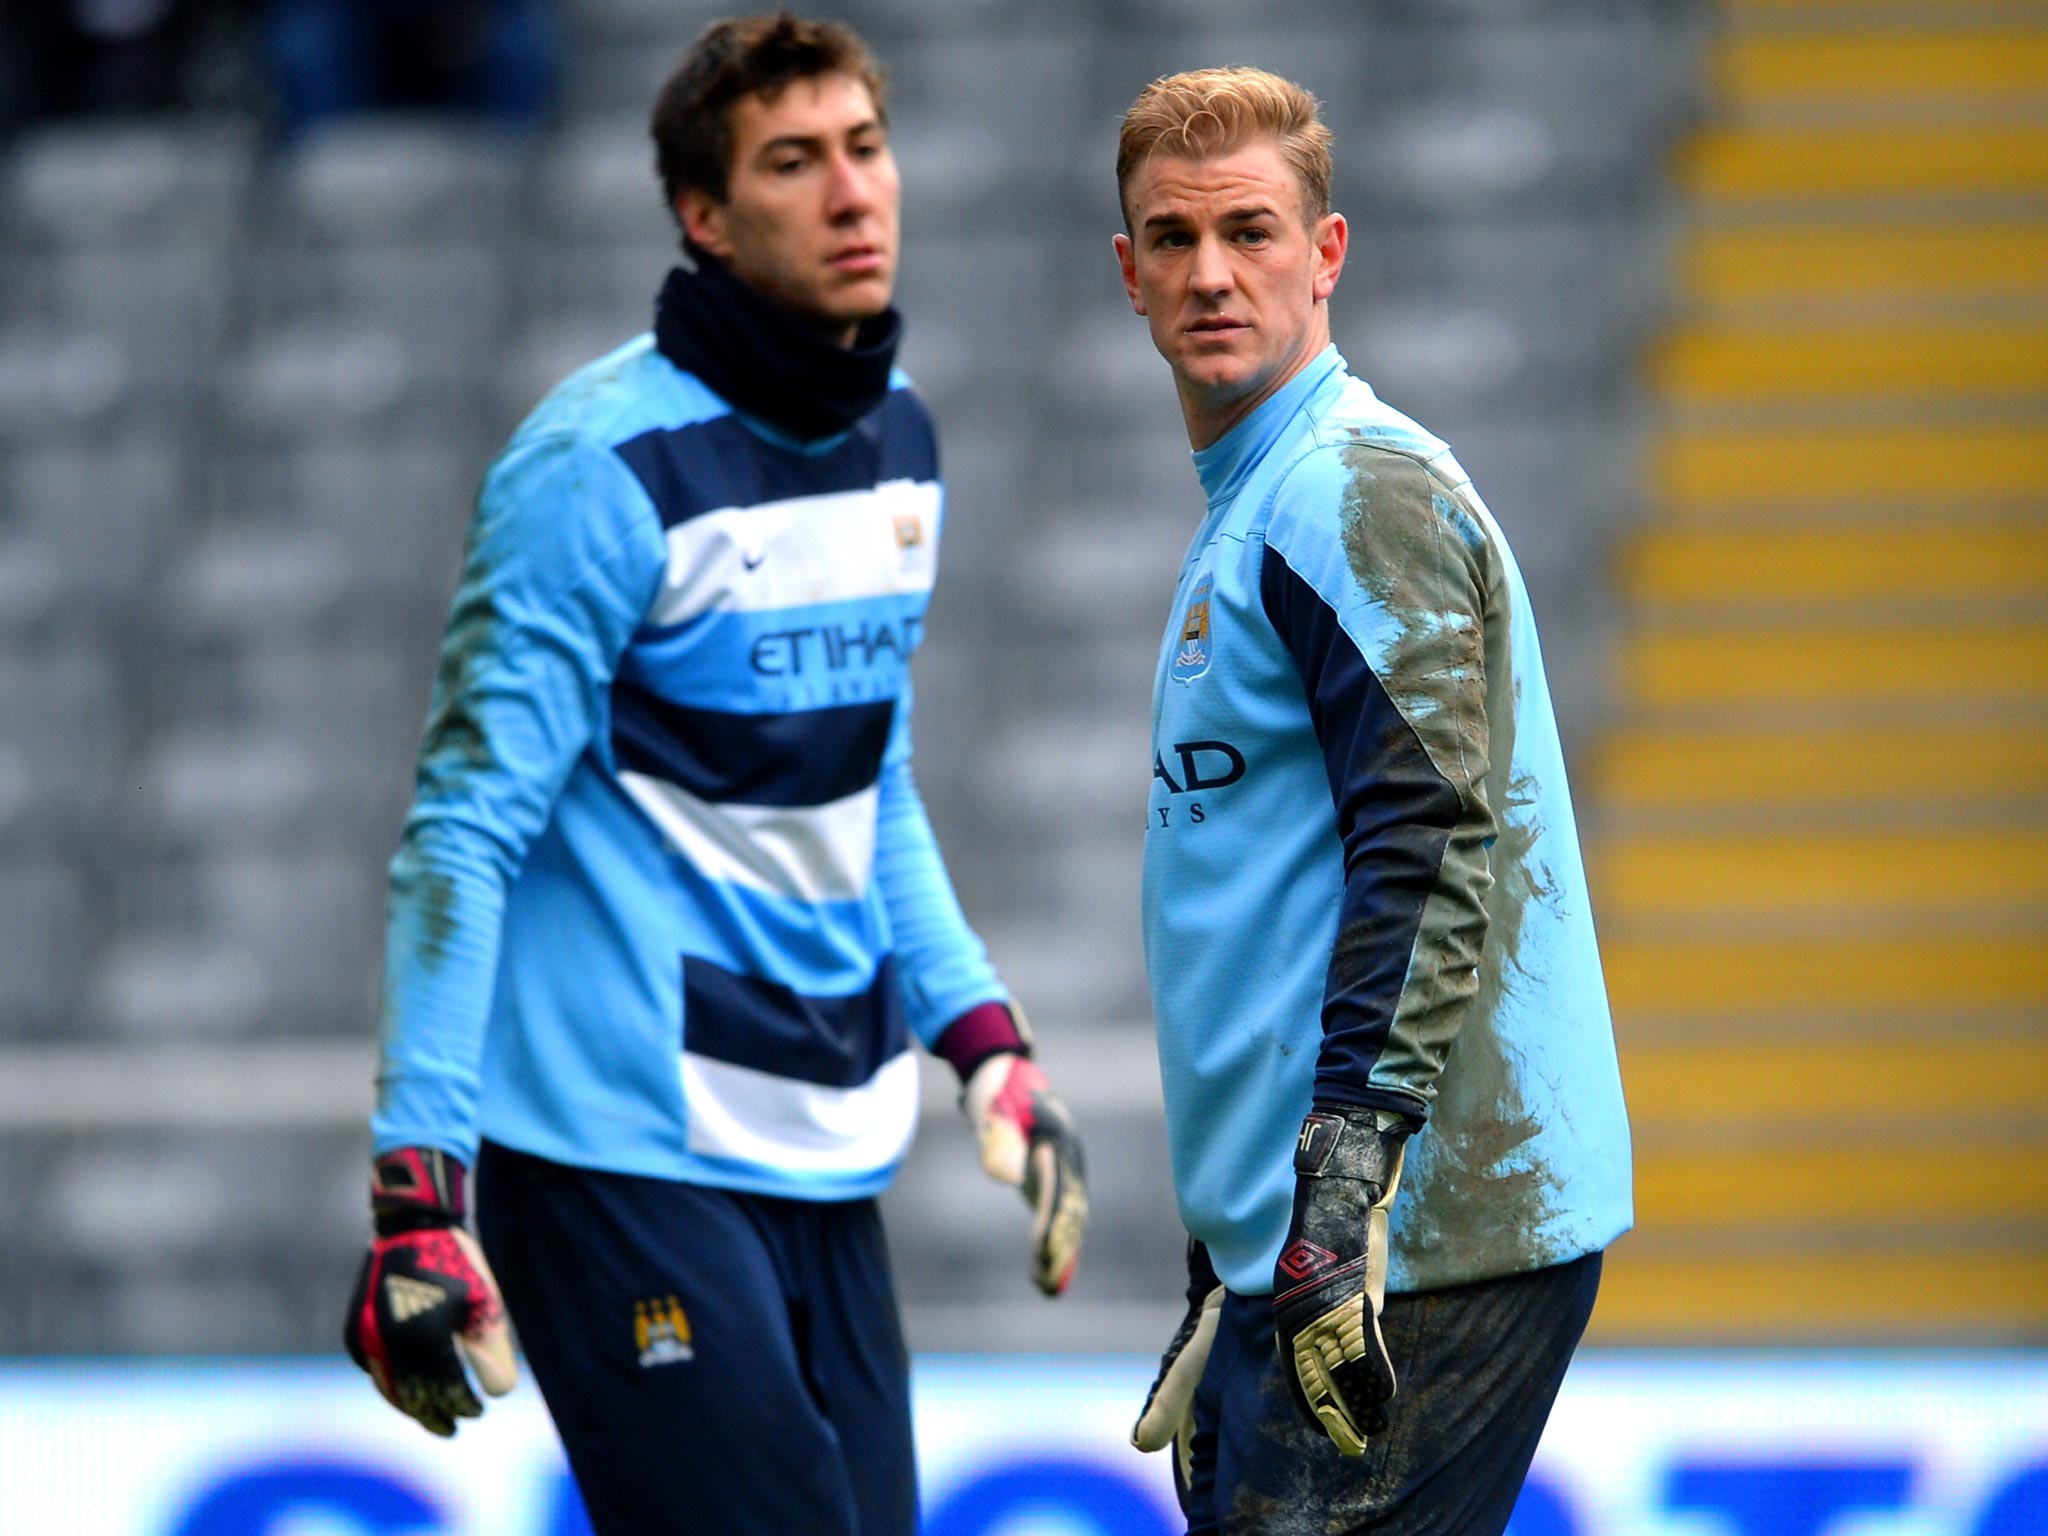 Costel Pantilimon and Joe Hart (right) are vying to play in goal for
Manchester City tomorrow